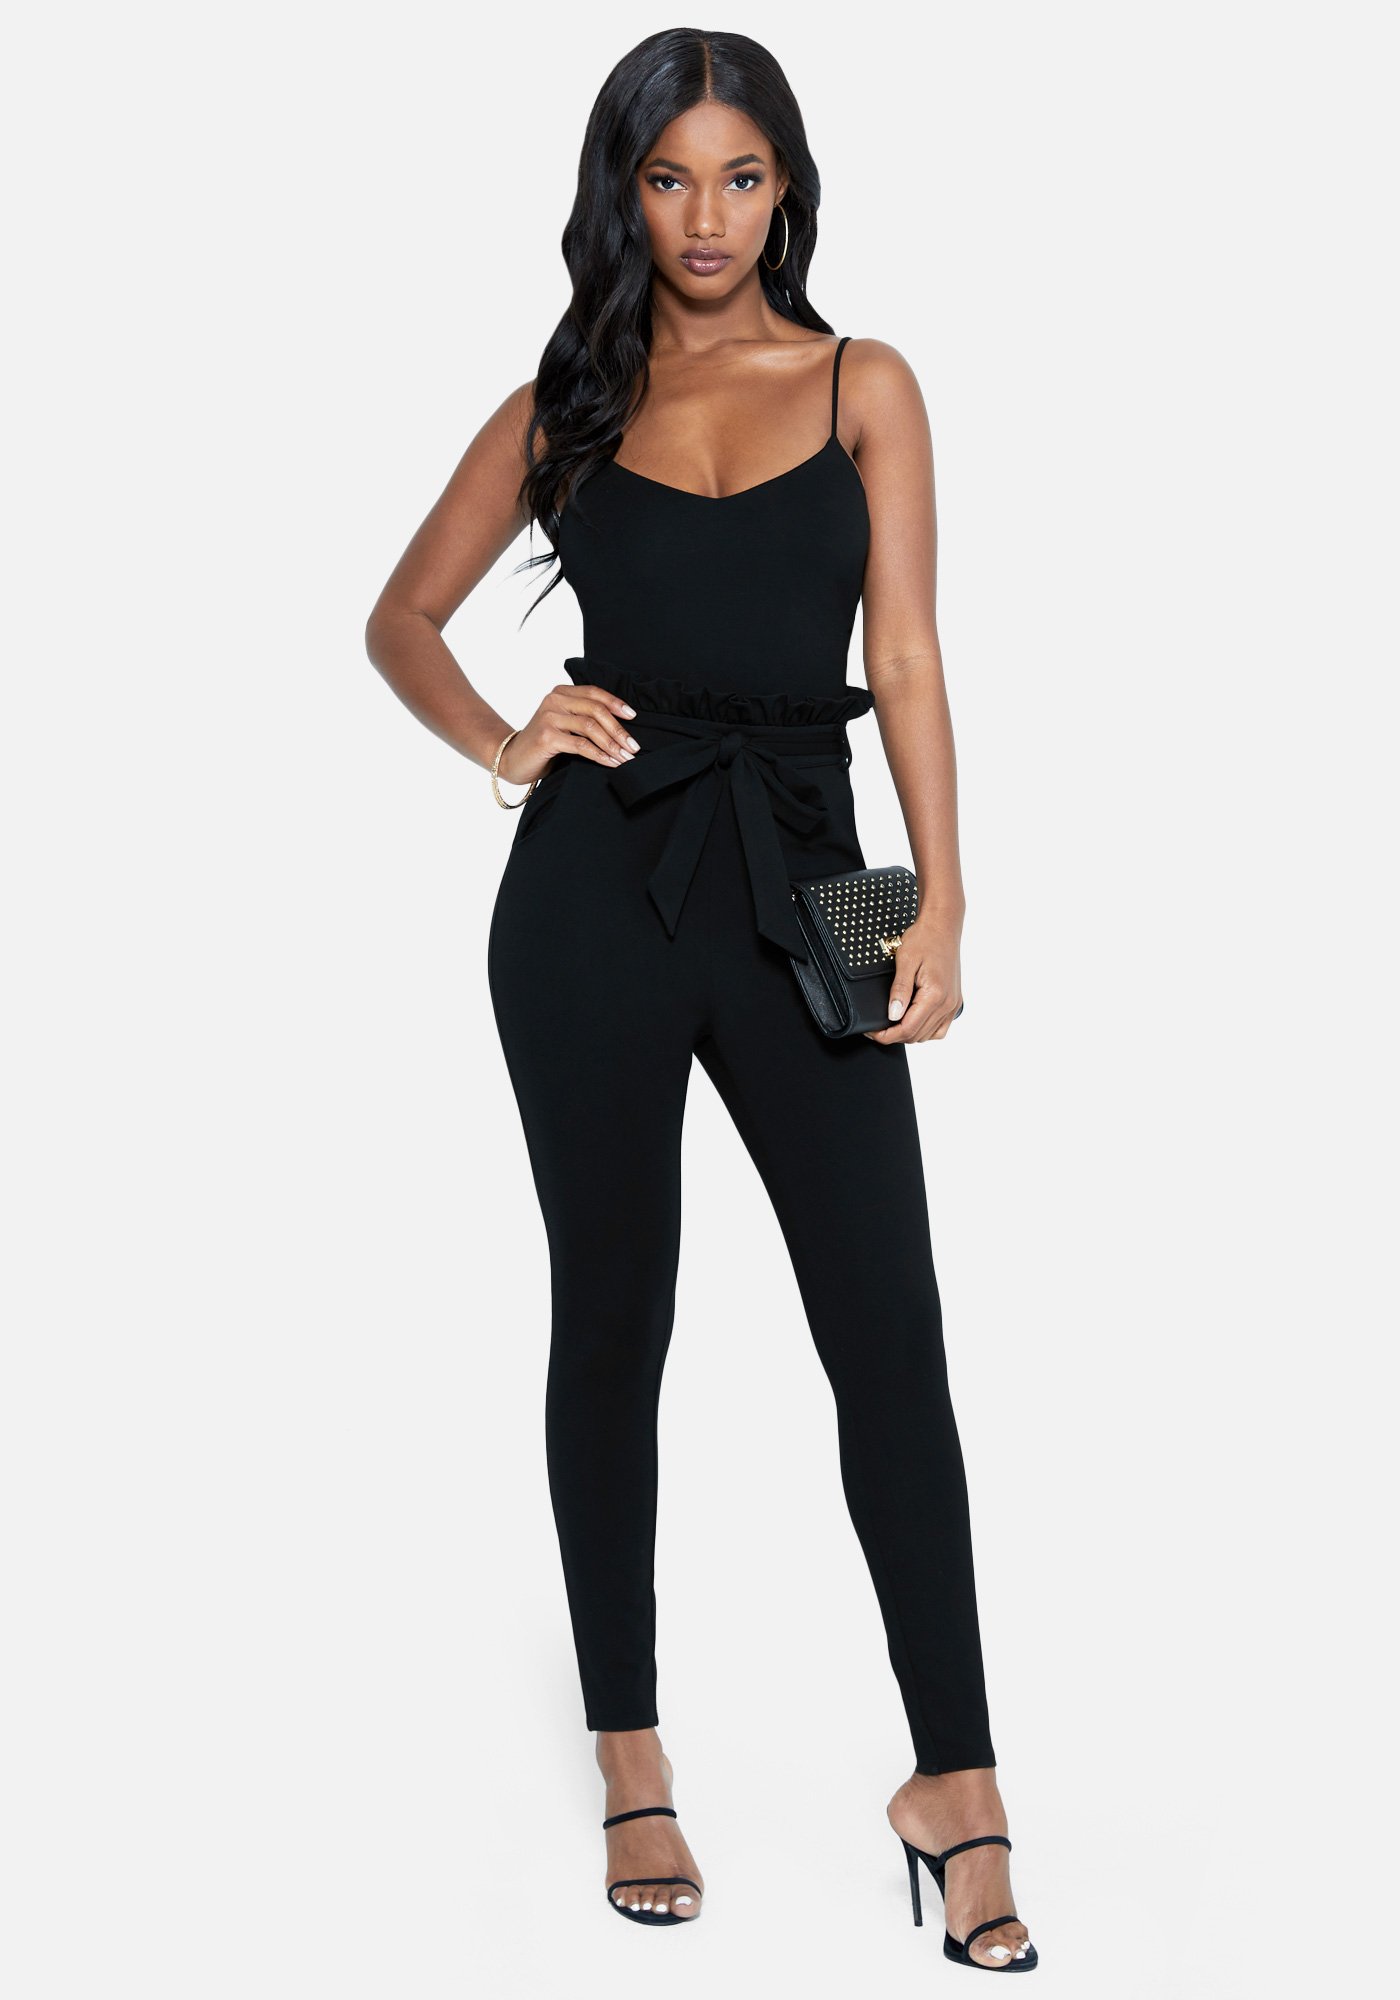 Bebe Women's Paper Bag Mixed Fabric Catsuit, Size XXS in BLACK Spandex/Viscose